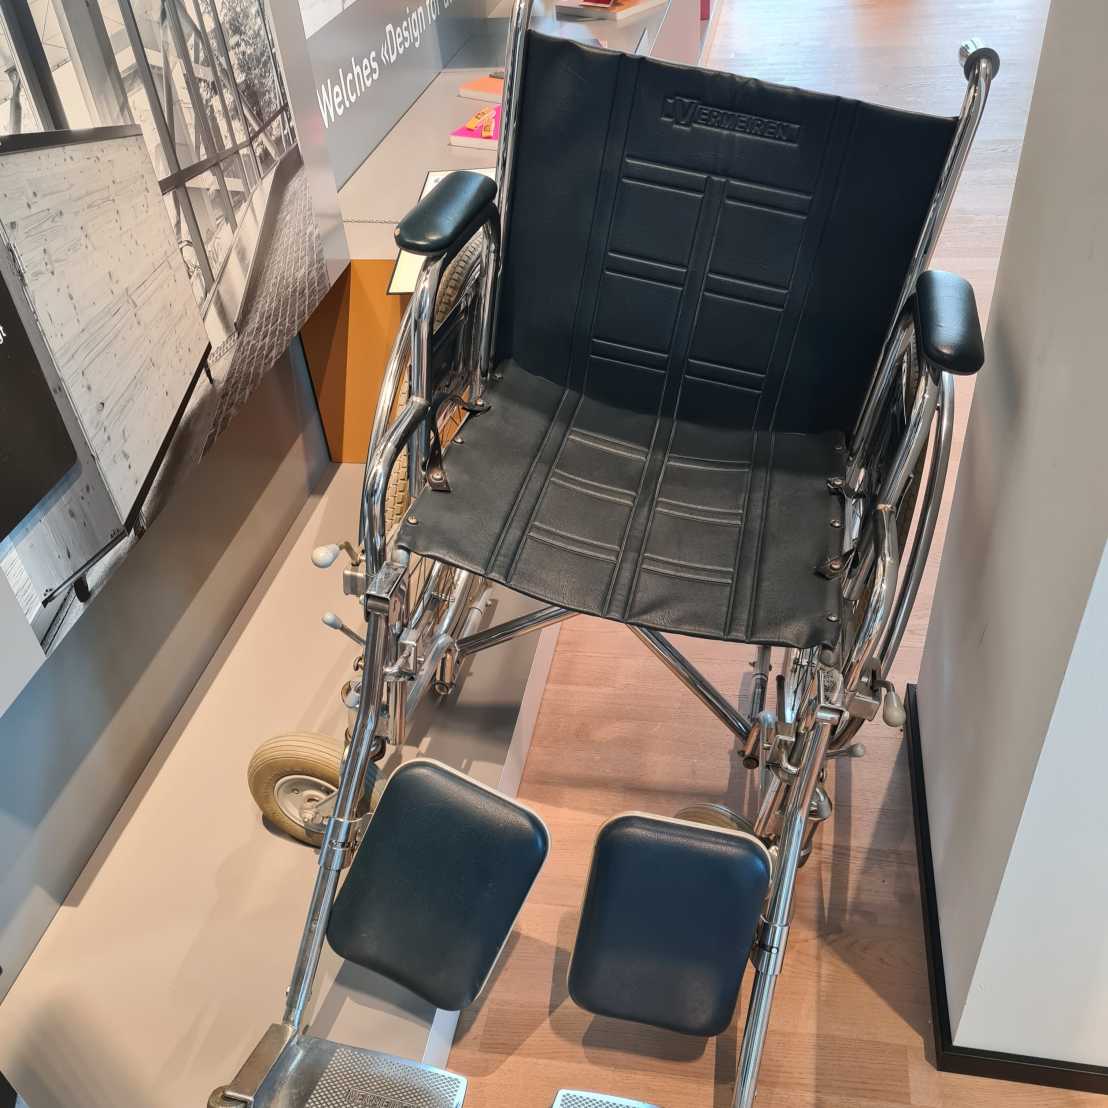 A wheelchair stands next to a pillar in the exhibition